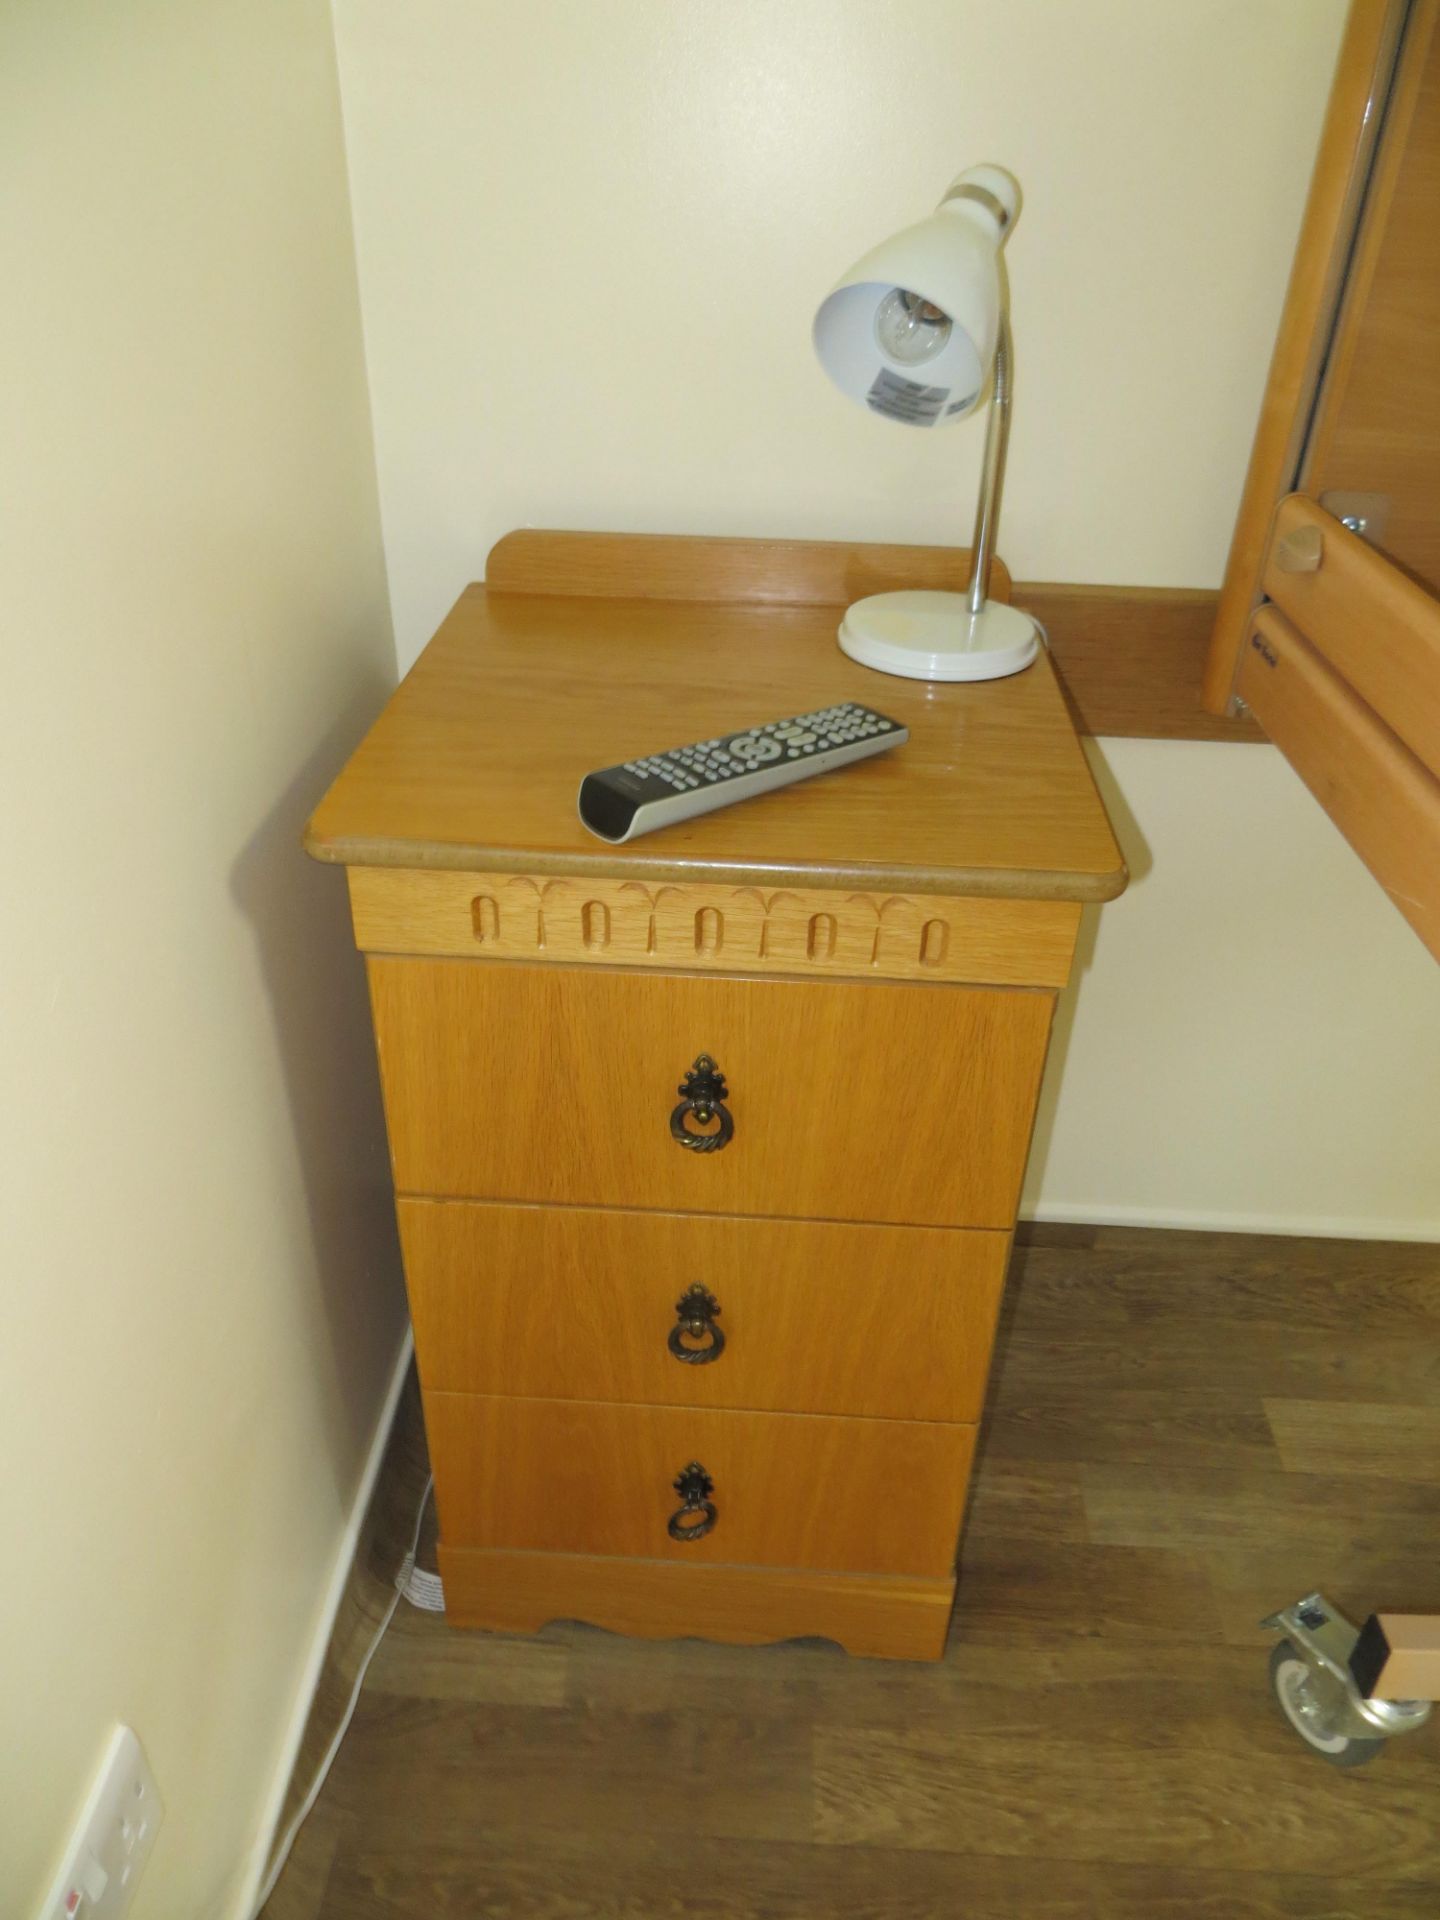 Contents of room Bethany to include three drawer bedside cabinet, foot stool, lamp, phone and wall - Image 2 of 2